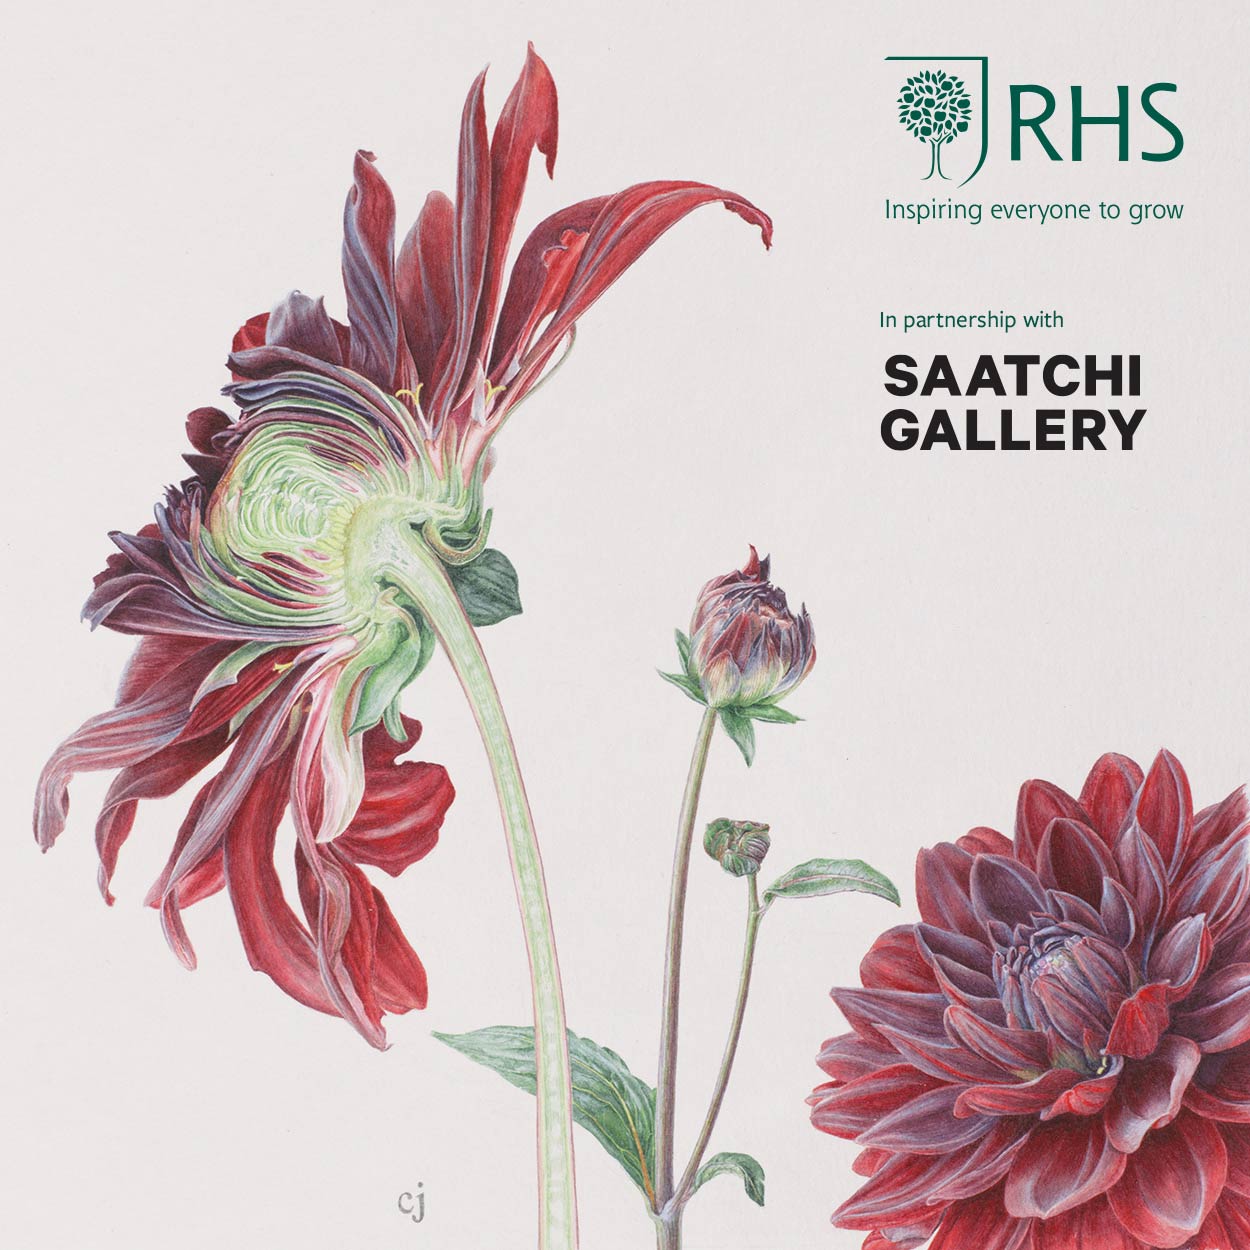 Riverstone to support the RHS Botanical Art & Photography Show 2021 in partnership with Saatchi Gallery